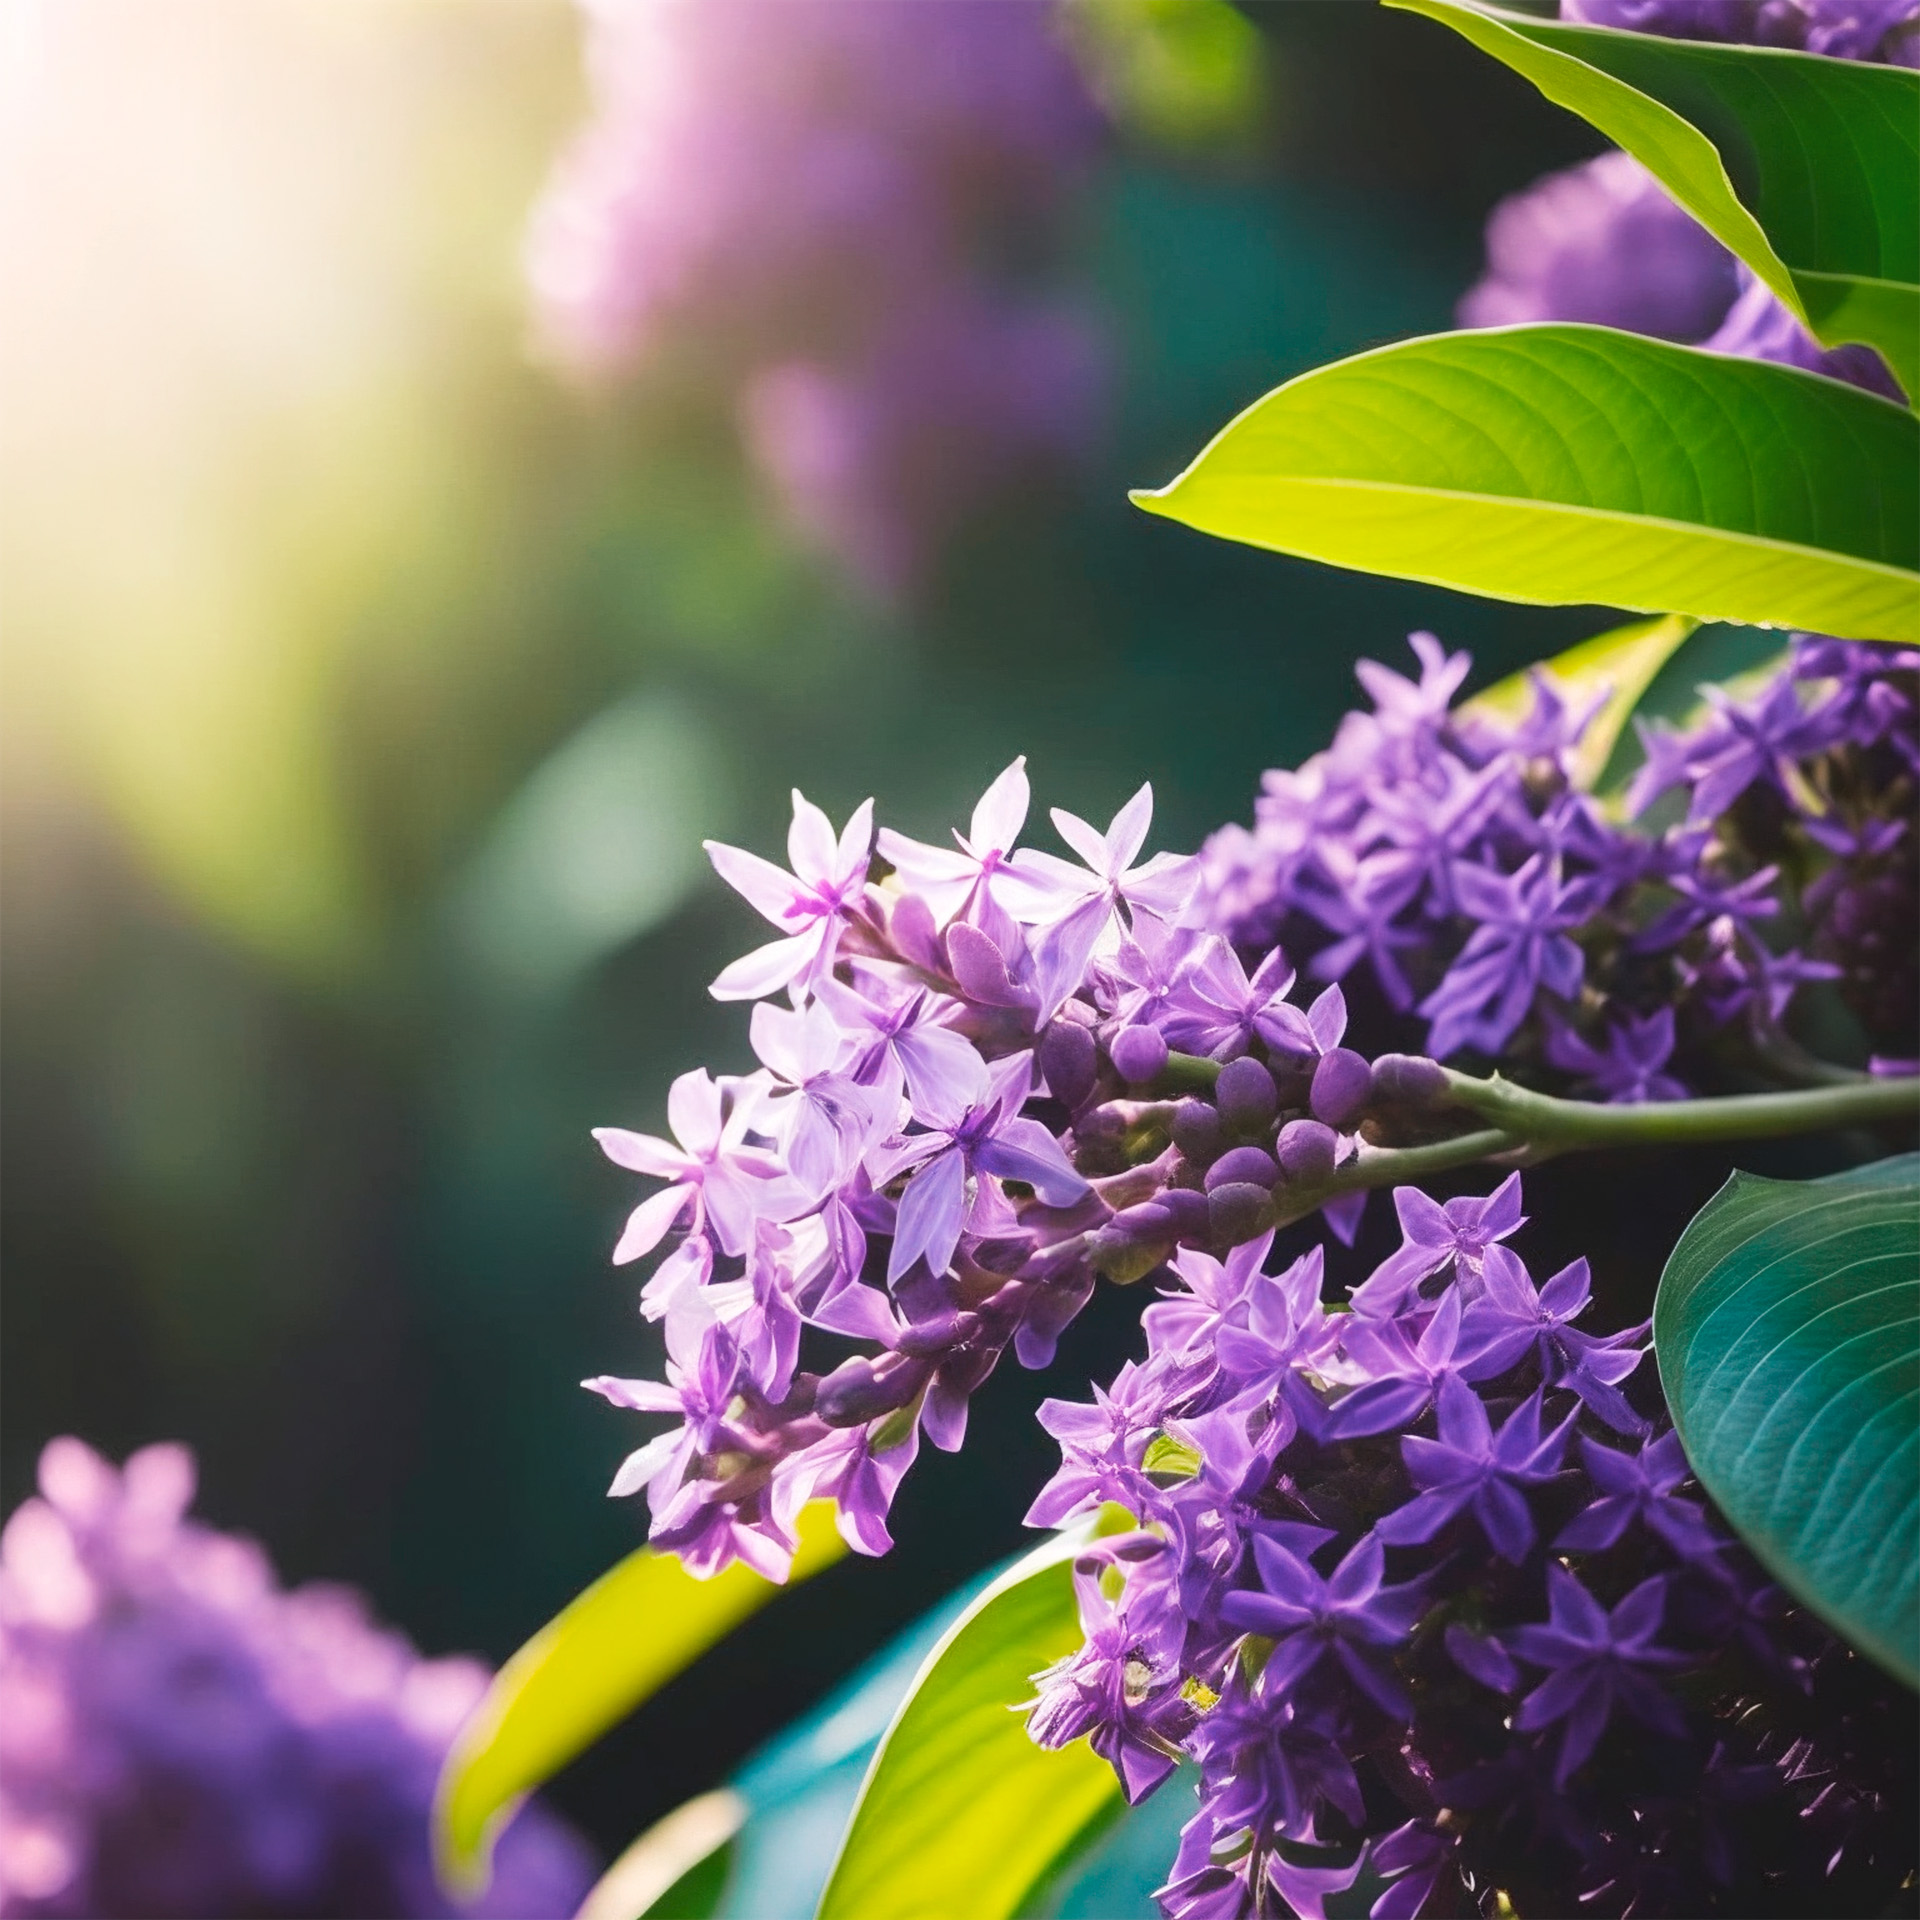 00001-3433093922-classicnegative, (low angle_1.1) macro photography of (Lilac_1.2), Tropical Forest, mountainscapes, Summer Sun, nature, 200mm 1